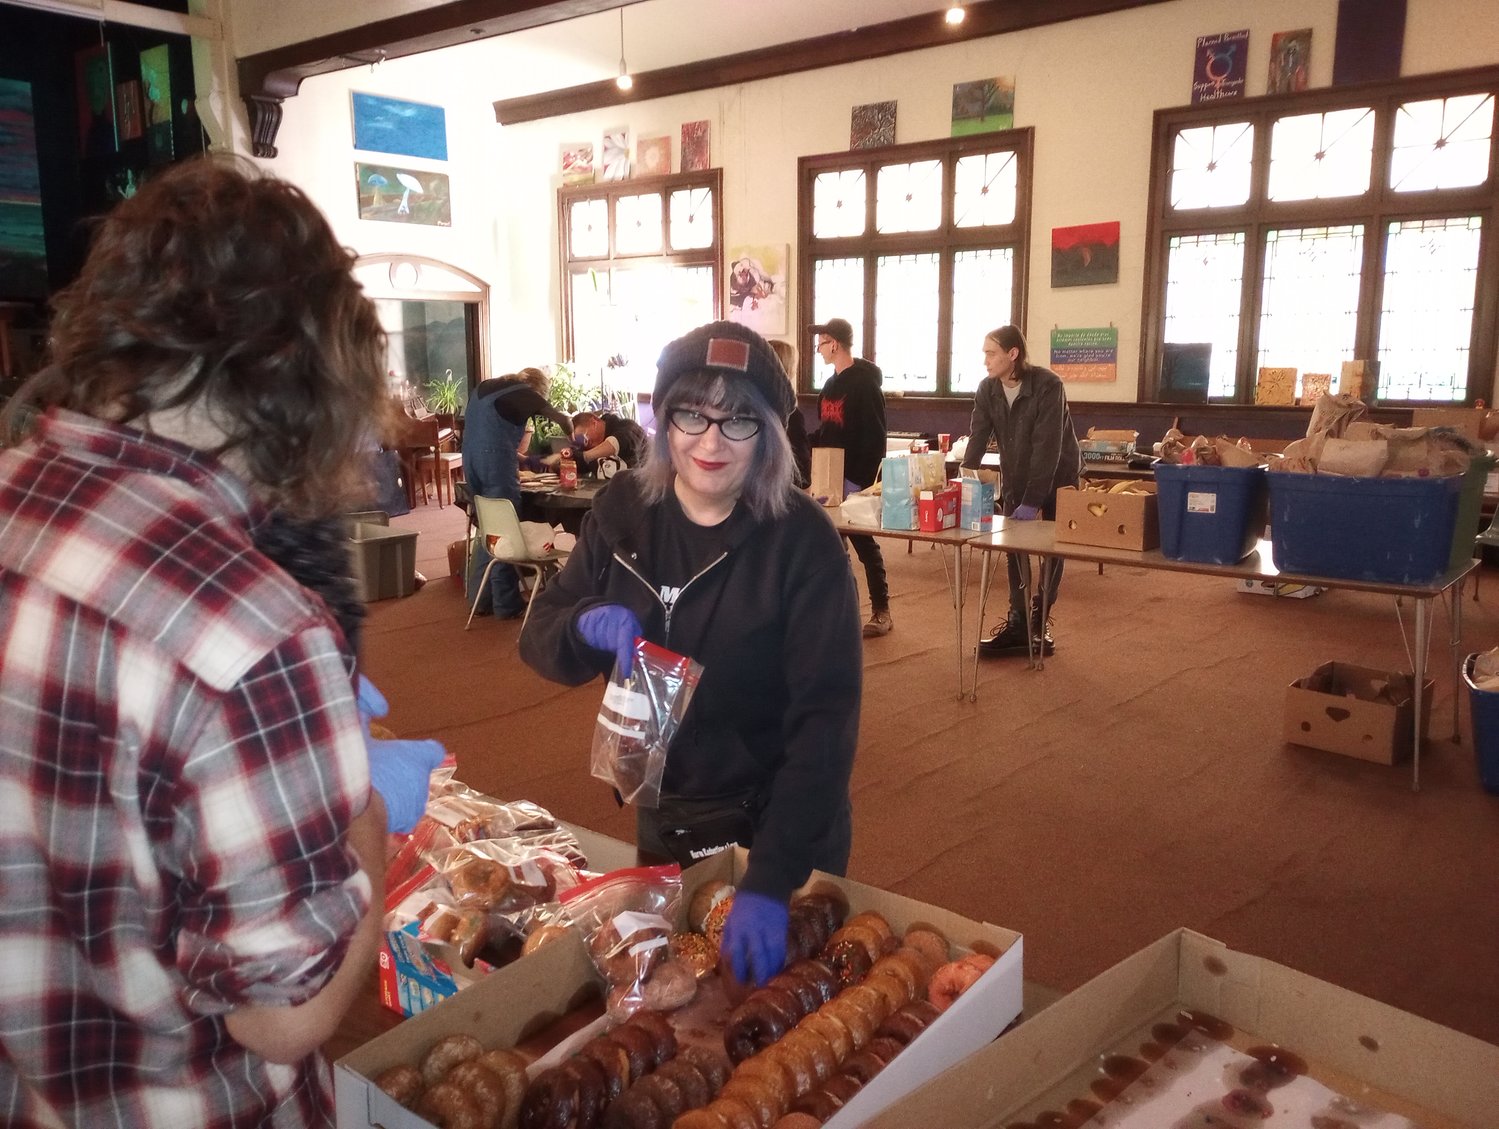 Julia Miller, one of the founders of Punks With Lunch and voted the No. 2 Best Activist in the Top of the Town Contest, helping assemble lunch bags for the homeless at The Fledge on a recent Saturday.